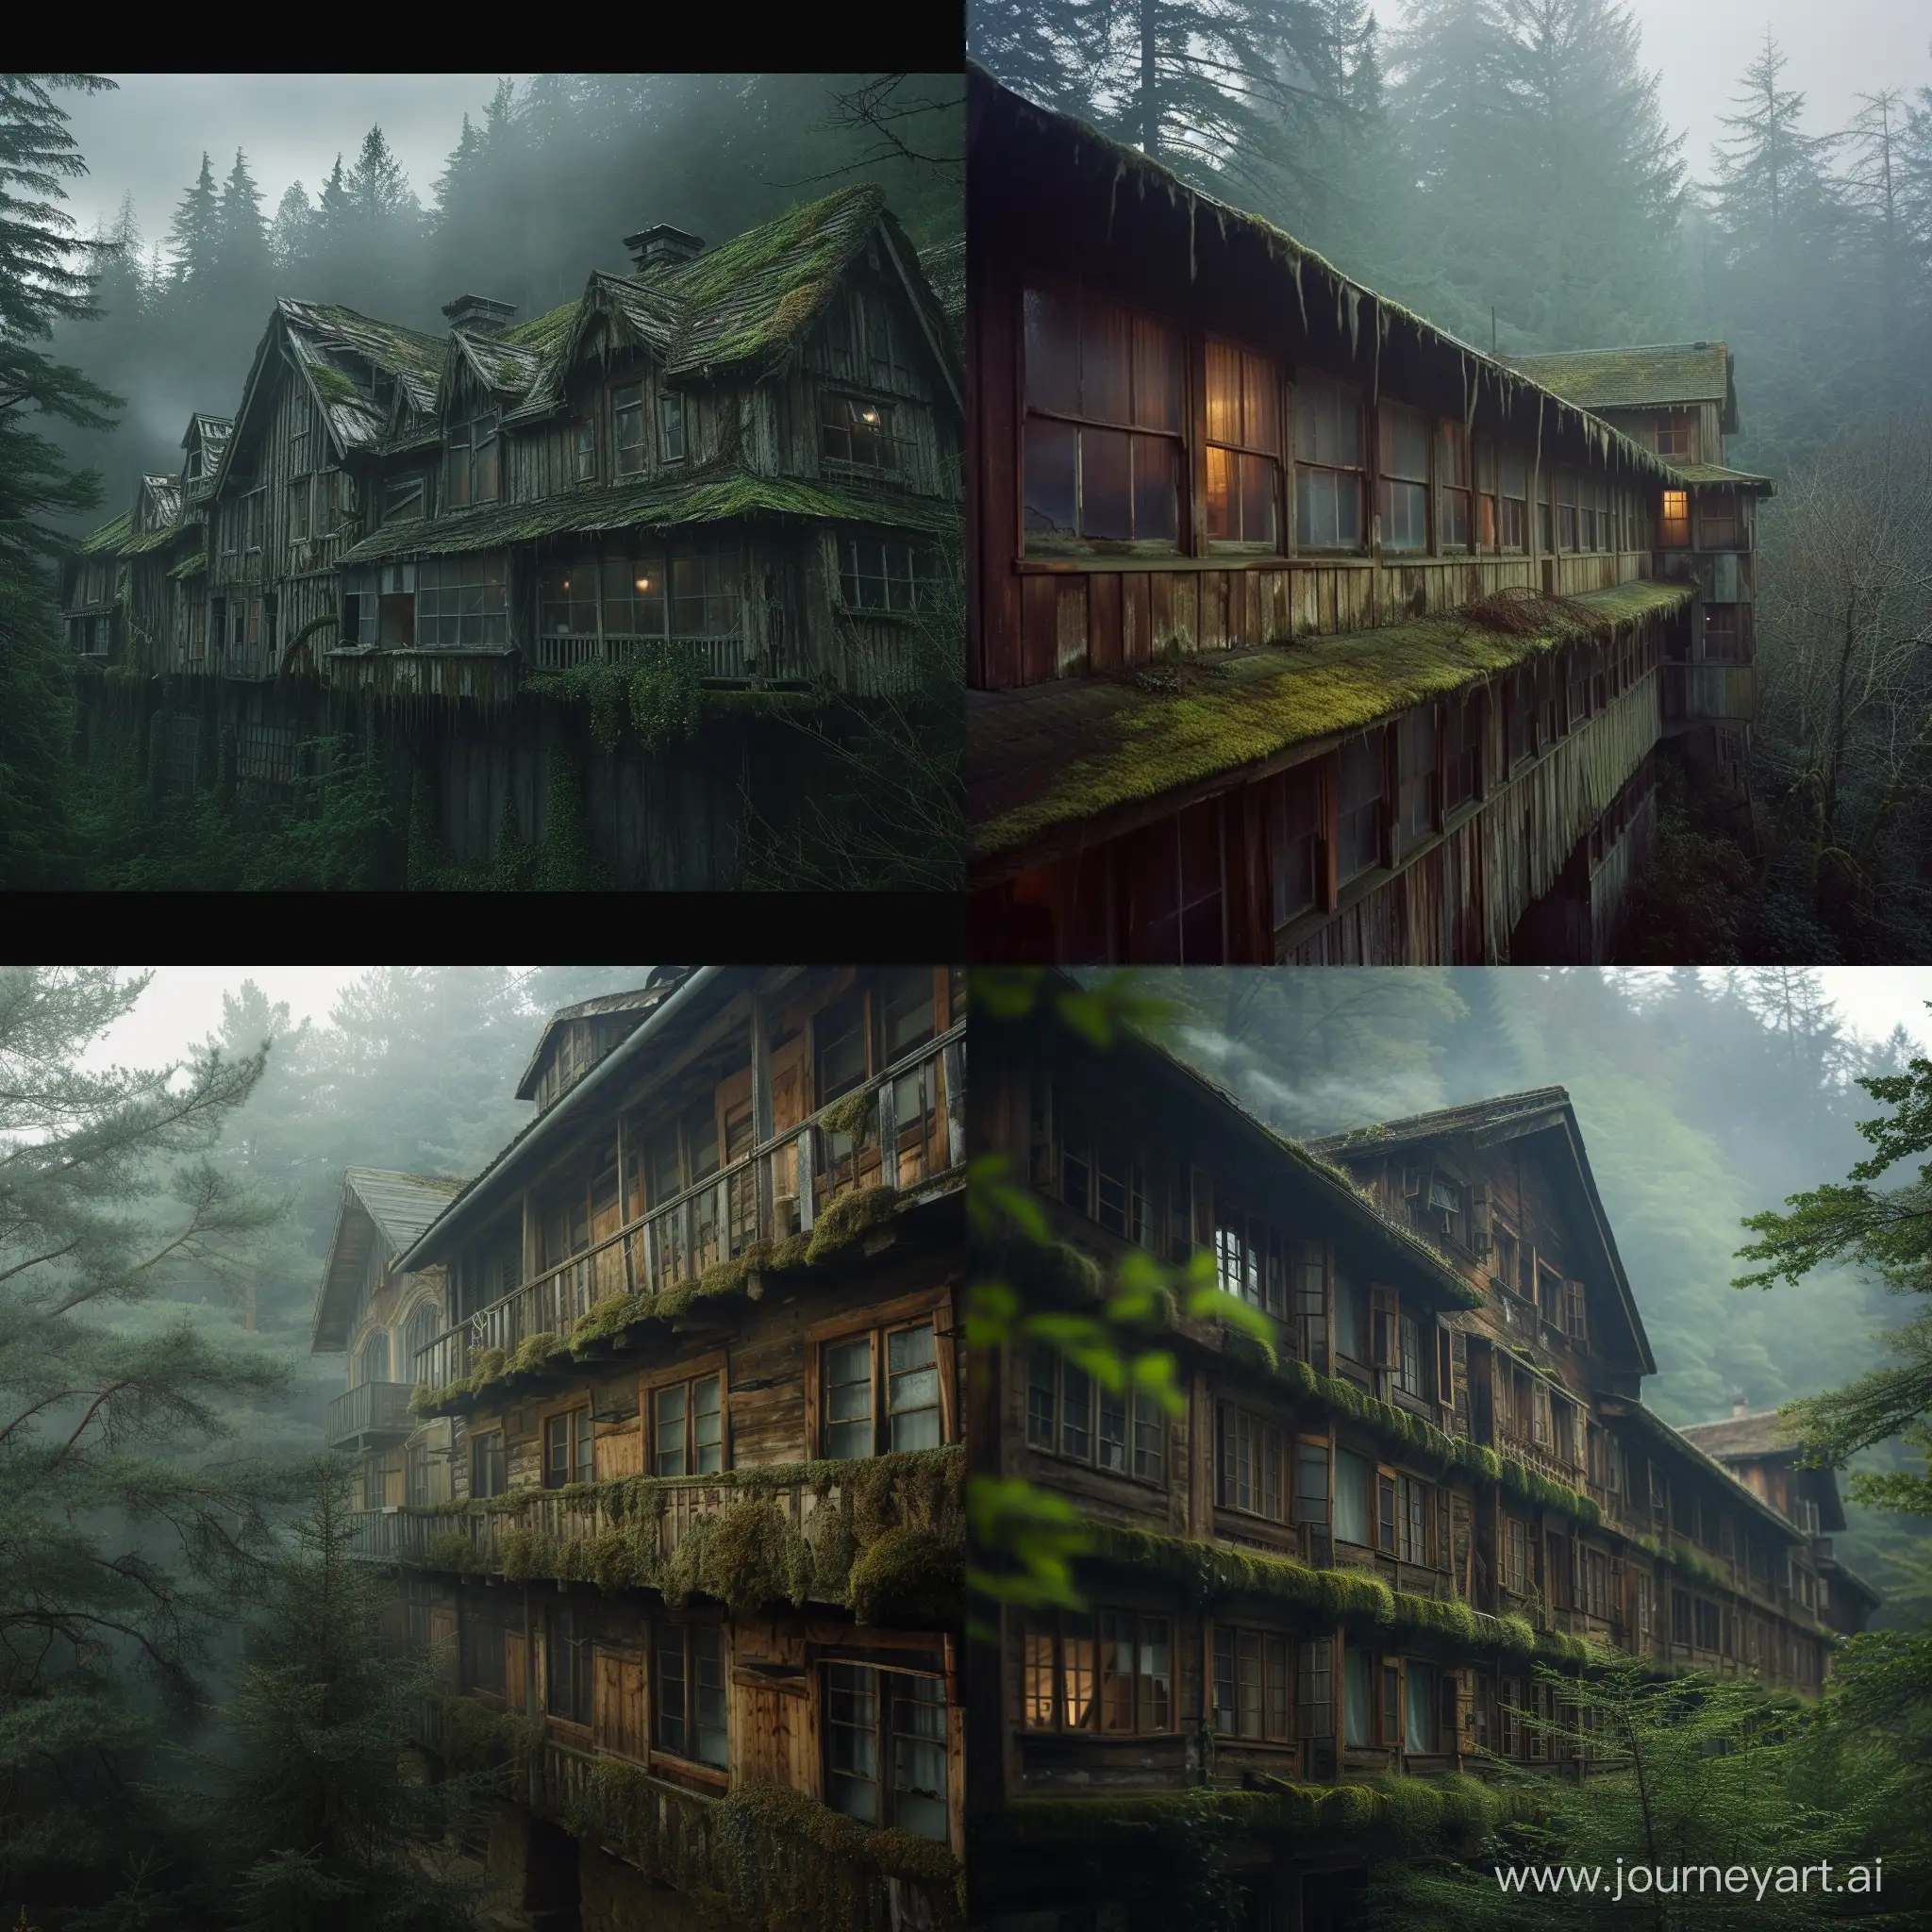  eerie old hotel located in the middle of the woods? The hotel should have a weathered wooden exterior, covered in moss, with foggy windows that evoke a sense of abandonment. The surrounding forest should add an extra layer of mystery to the scene